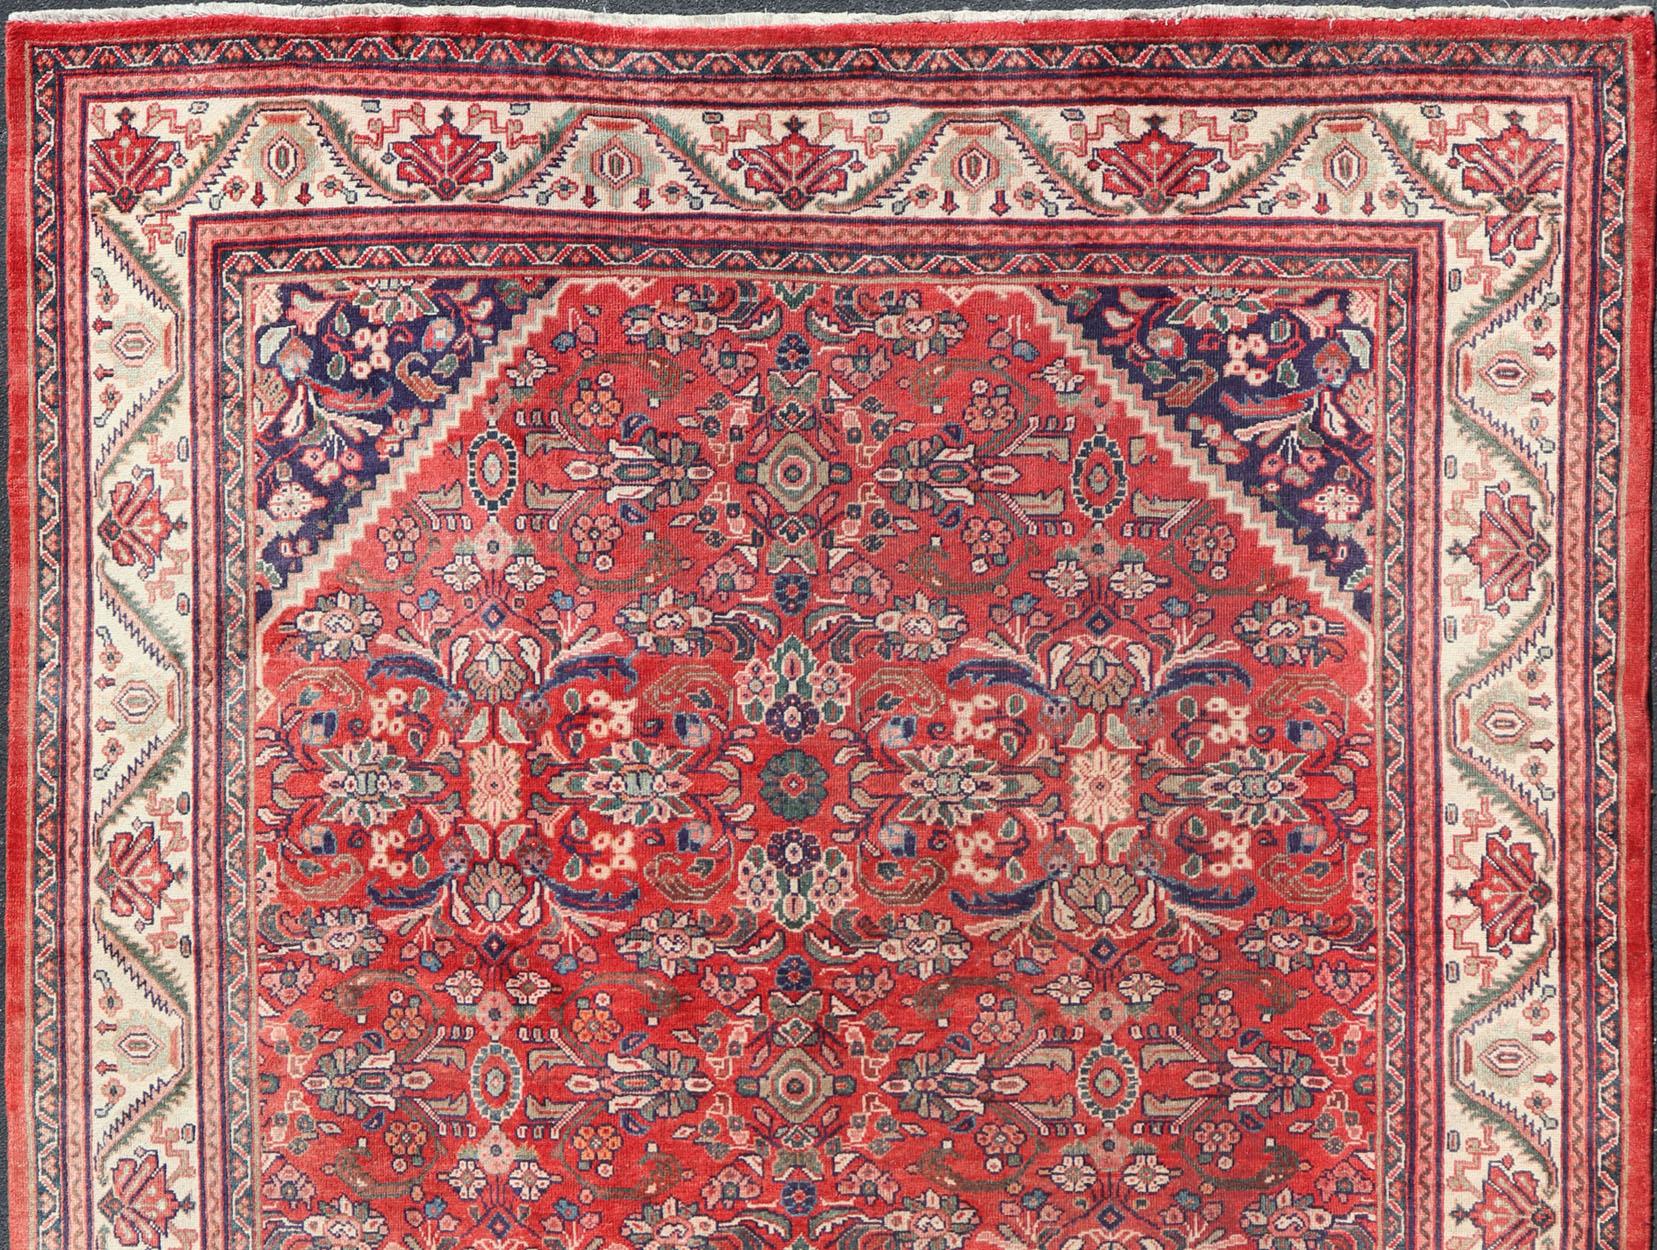 Antique Hand Knotted Persian Sultanabad-Mahal rug with red field and ivory border, Keivan Woven Arts rug PTA-200707, country of origin / type: Iran / Mahal , circa 1920s

Measures: 10'3 x 13'8.